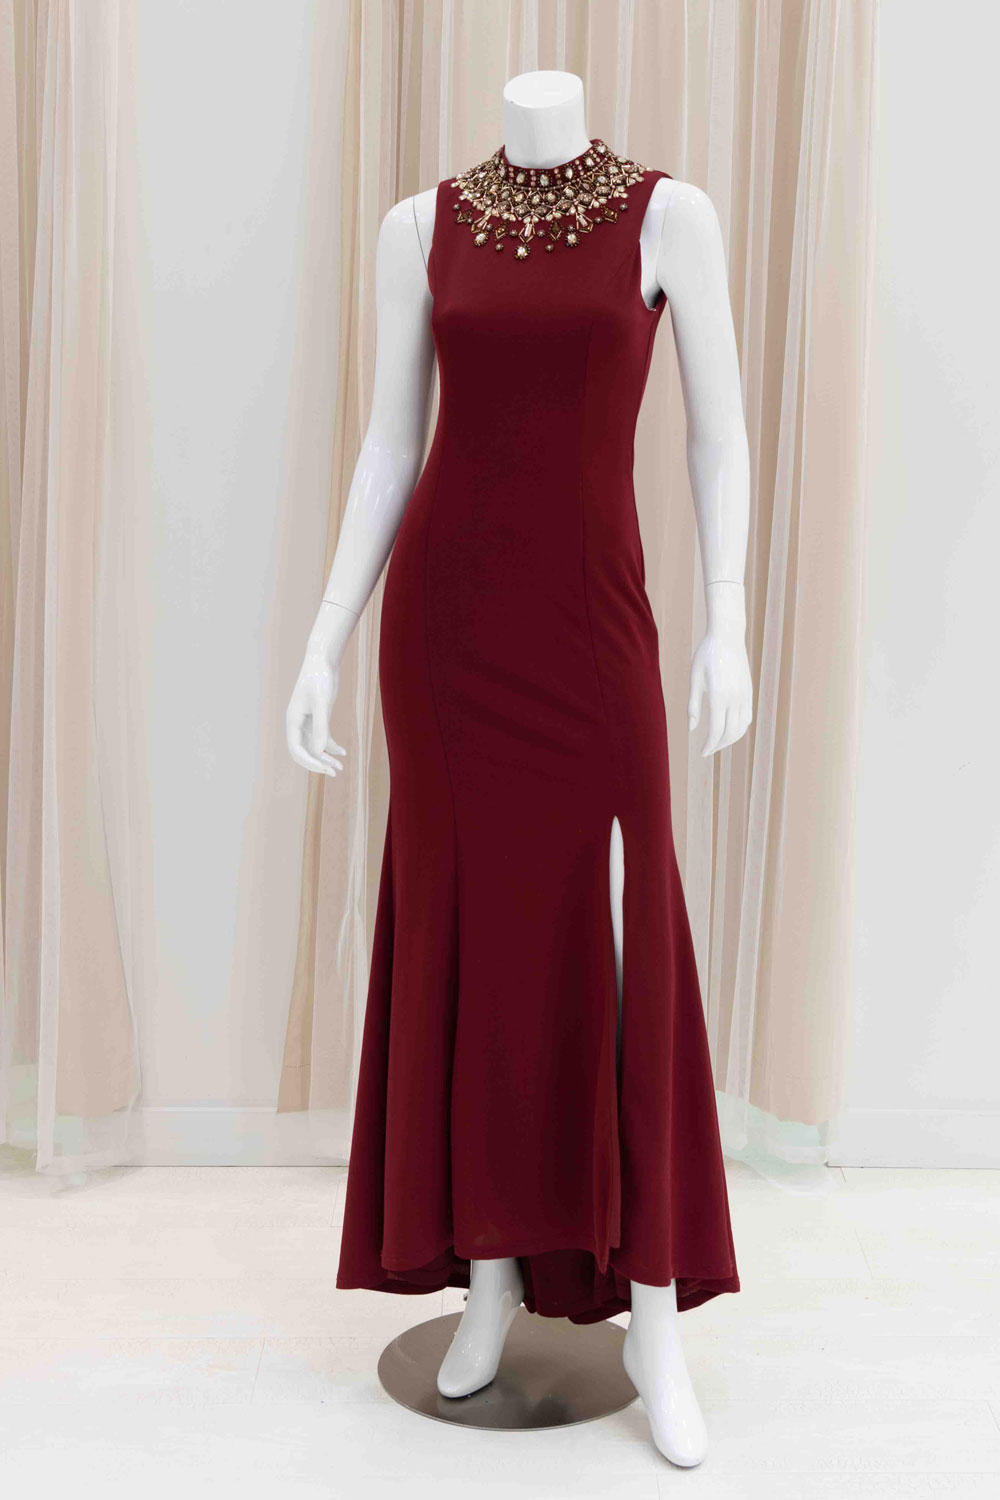 Beaded Collar Form Fitting Evening Gown in Burgundy